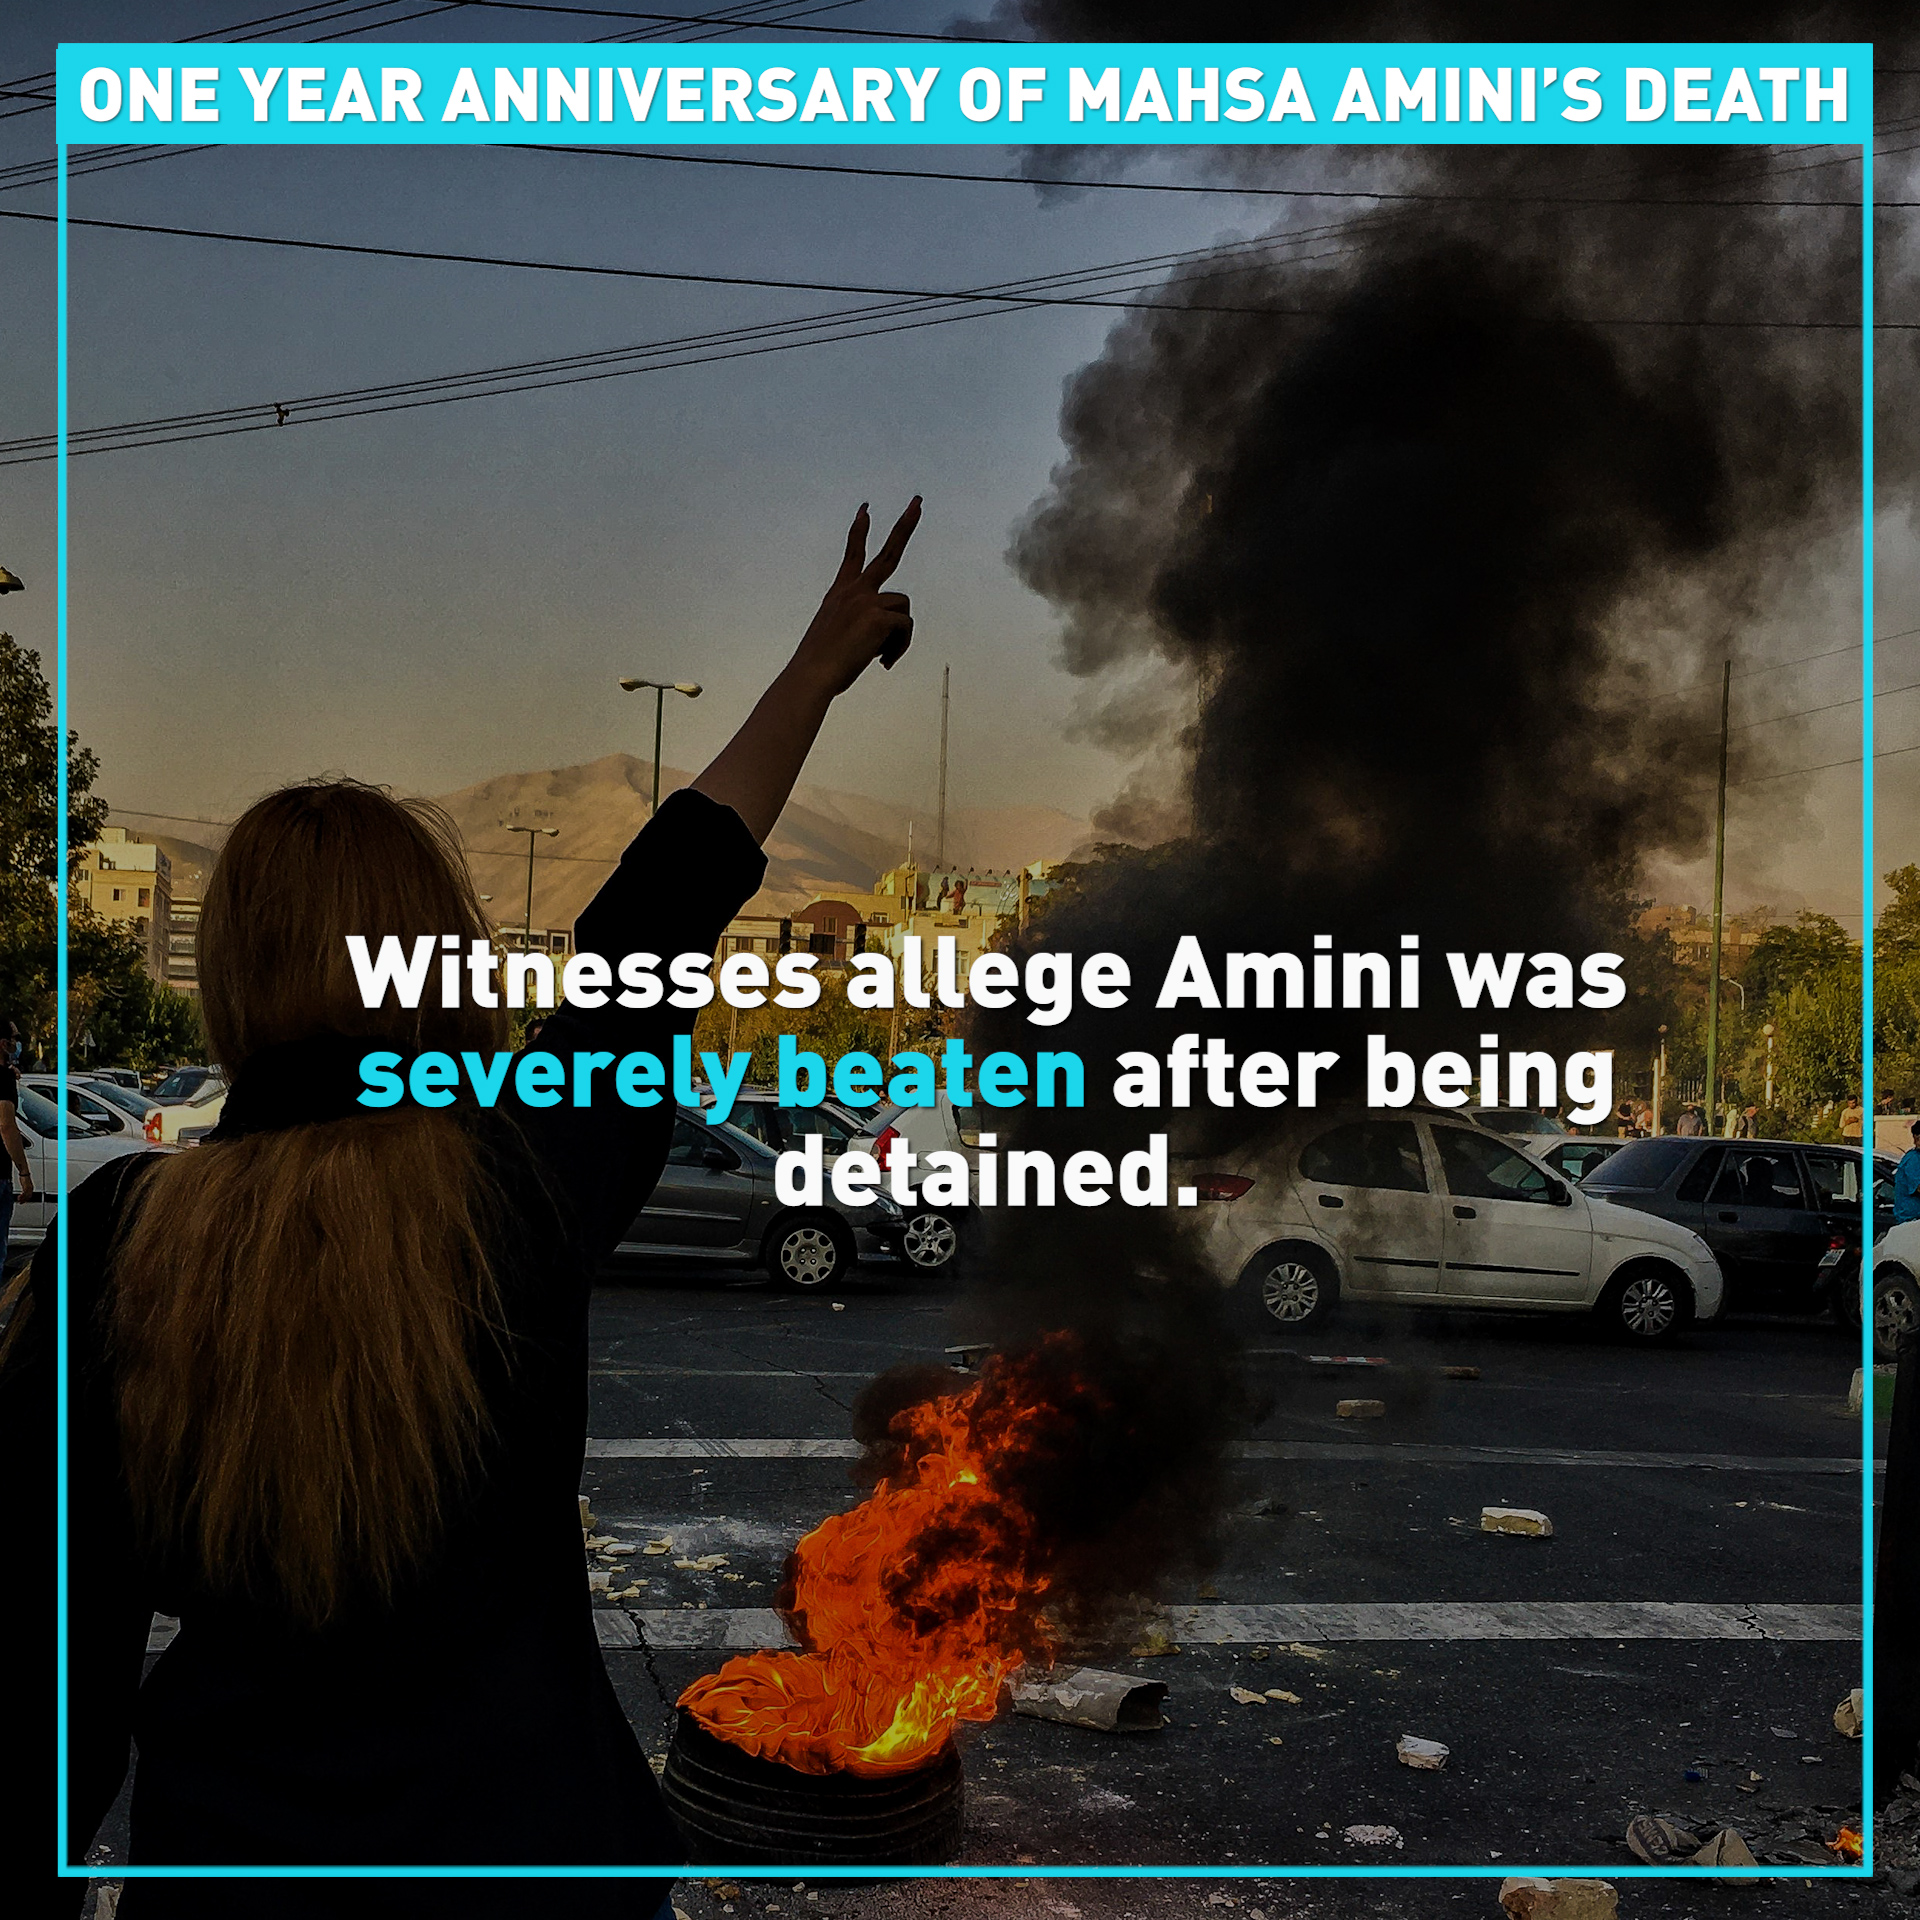 One year since Mahsa Amini died in custody of Iran's morality police 